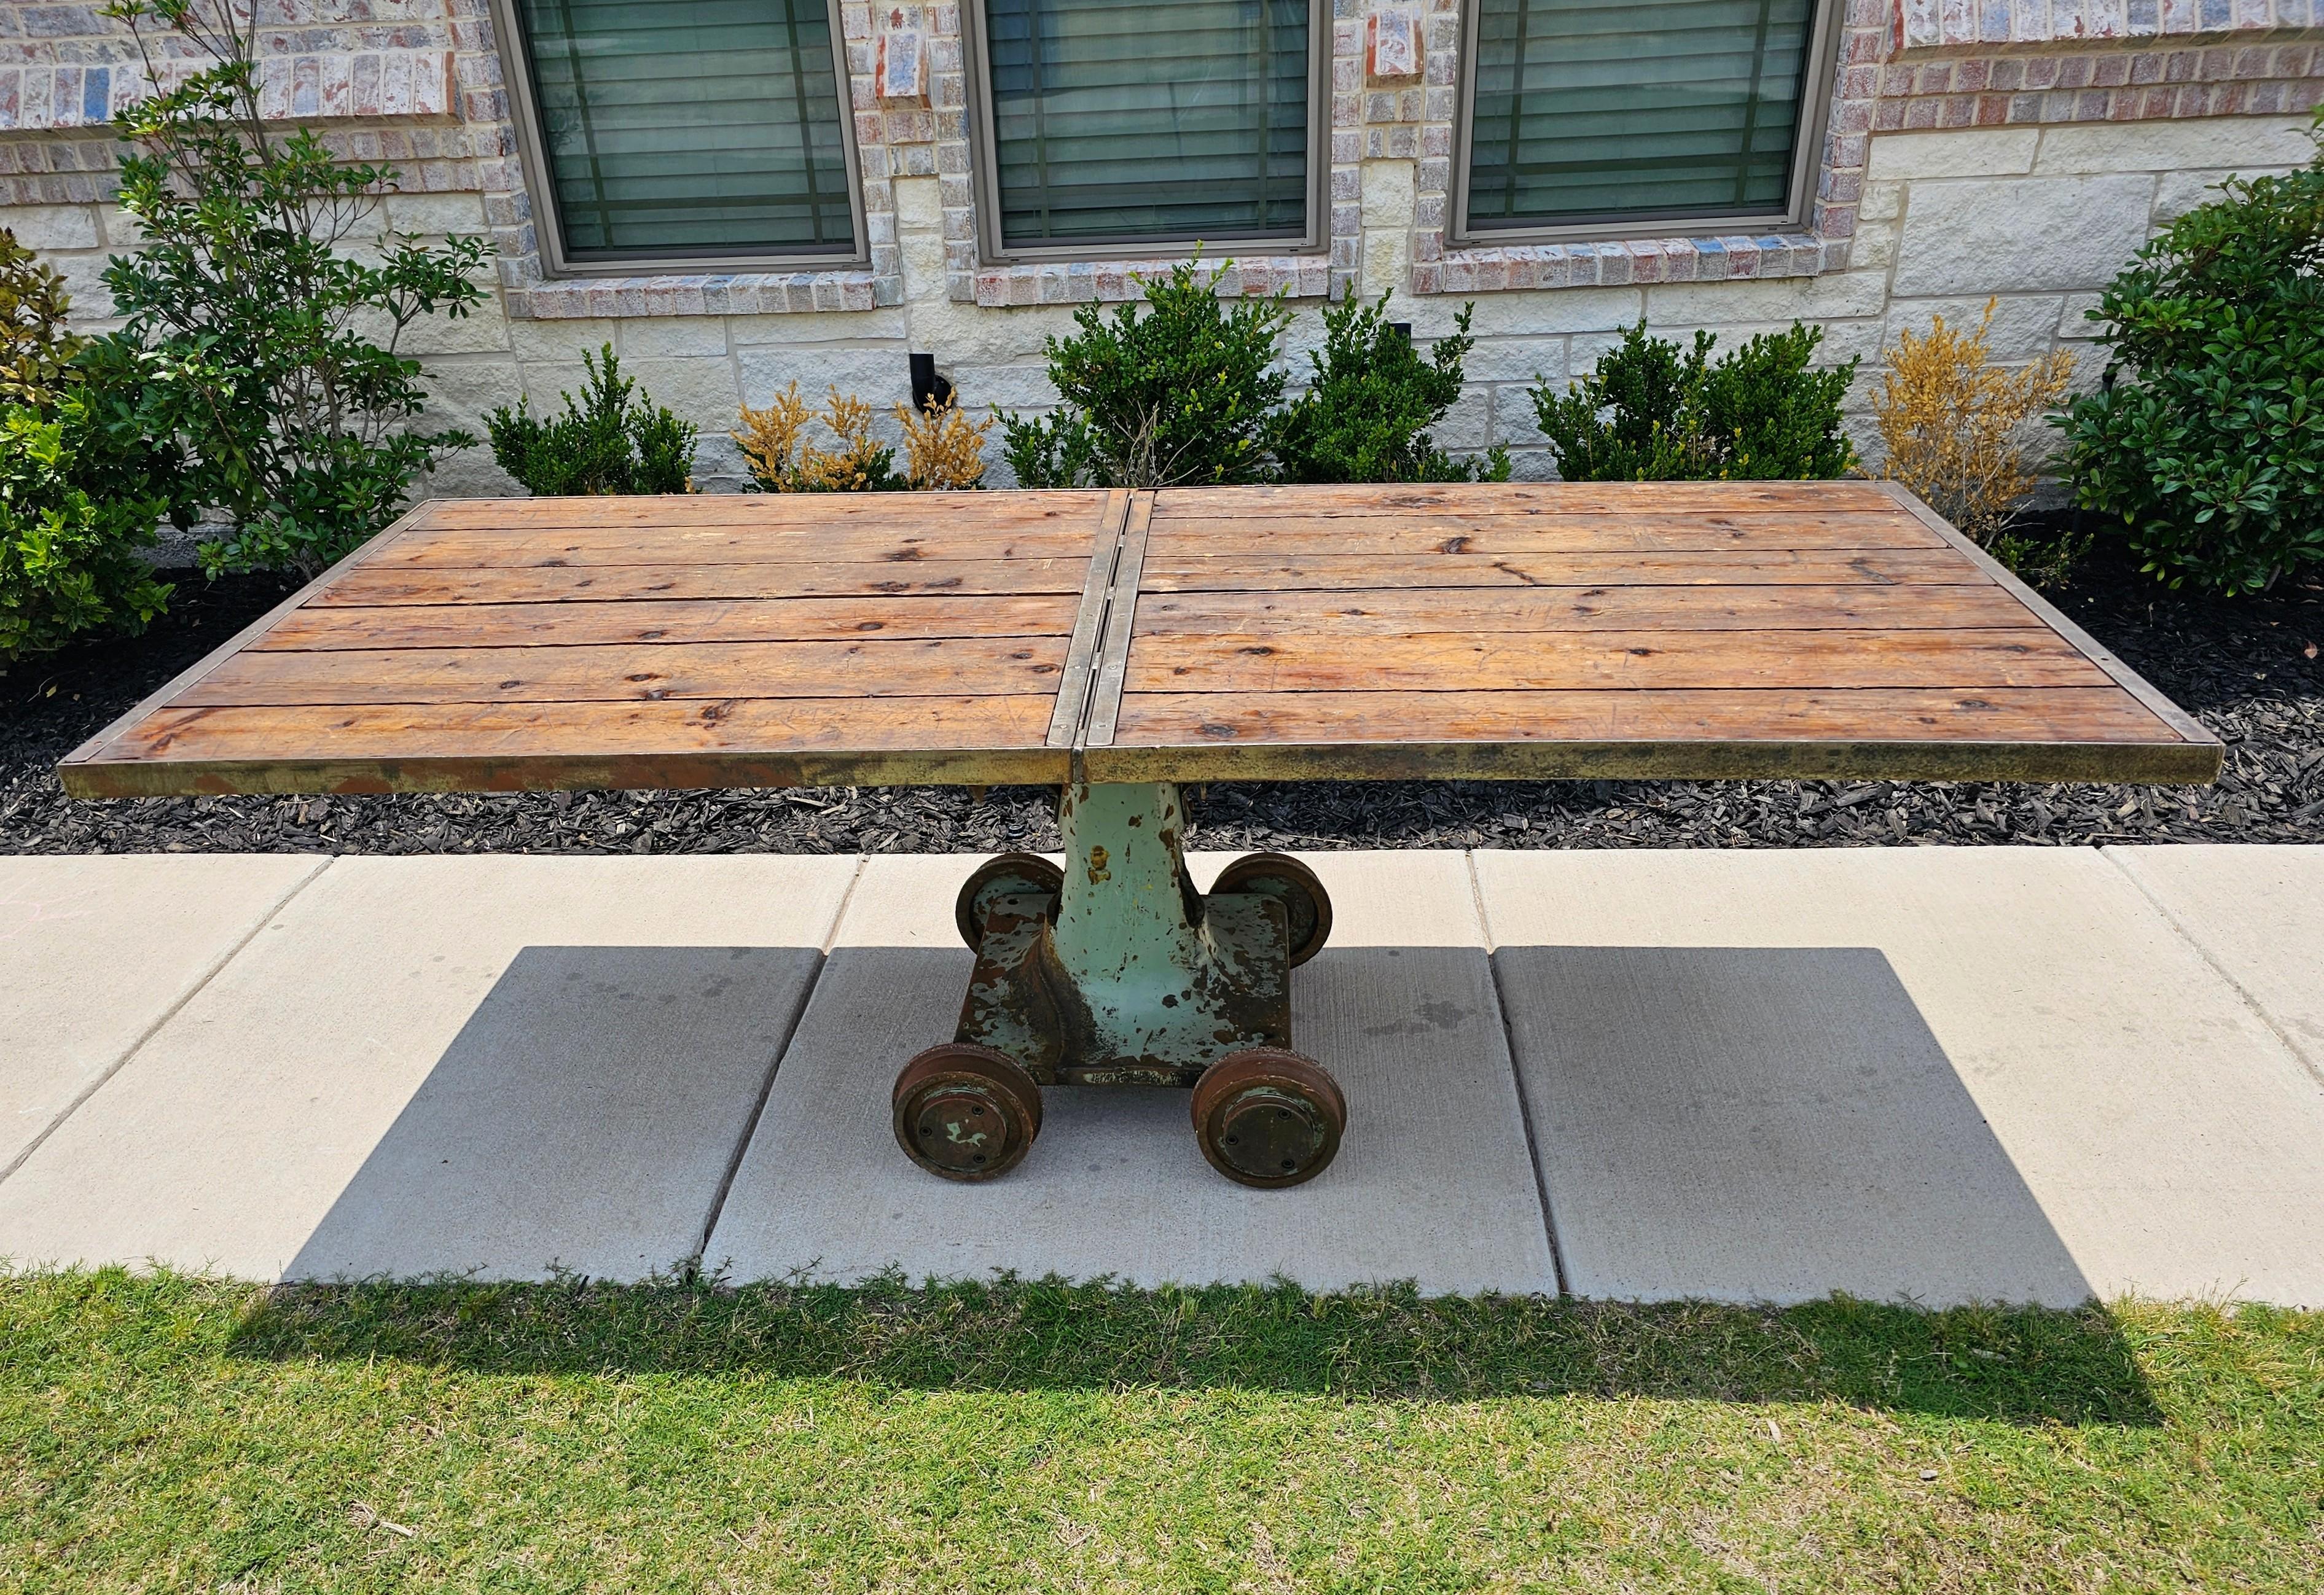 An incredible 20th century rustic industrial style repurposed dining table - kitchen island. 

Crafted from a heavy-duty utilitarian cast iron American factory - warehouse trolley base, circa 1940, with four solid cast iron wheels and cutout